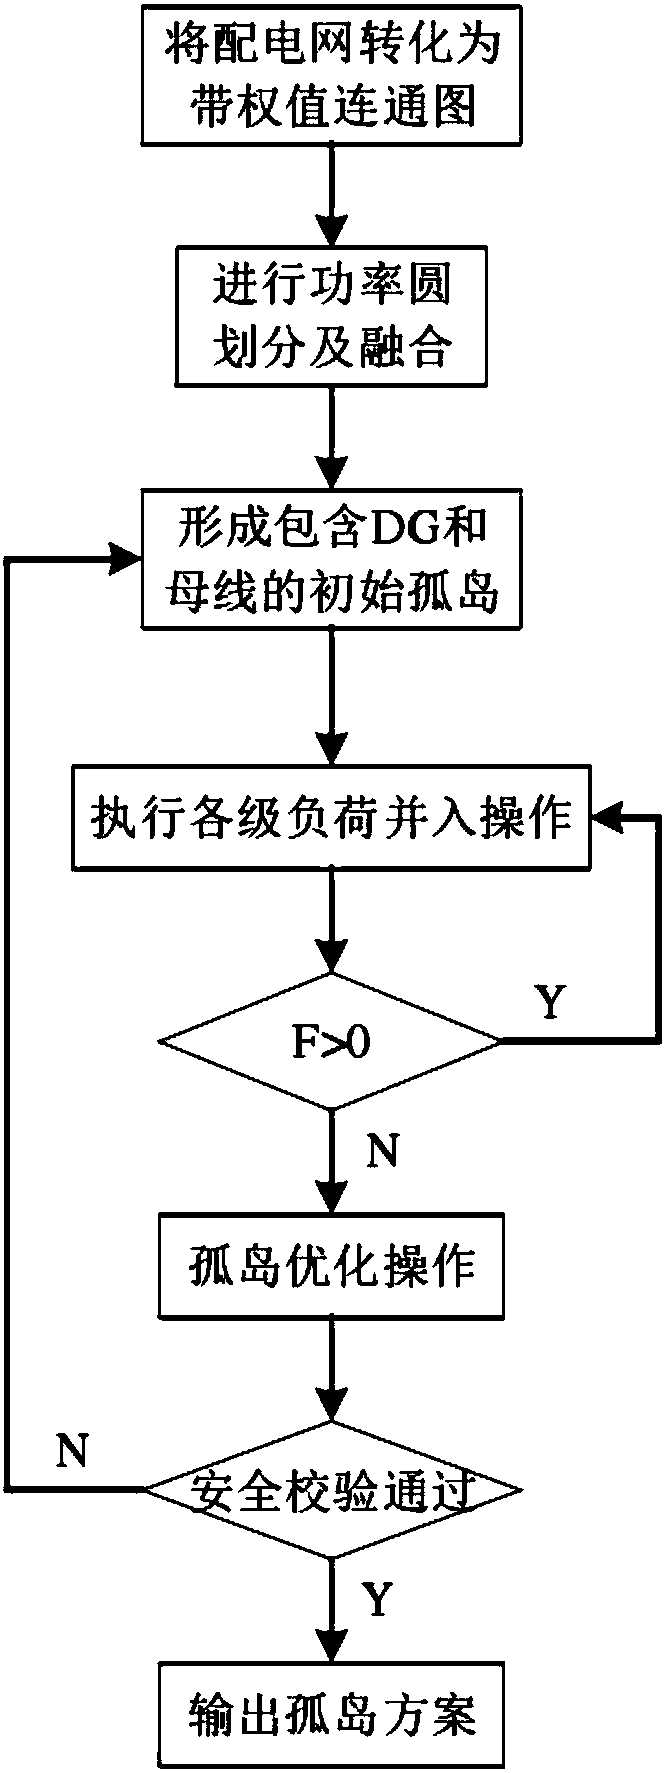 Active distribution network reliability assessment method